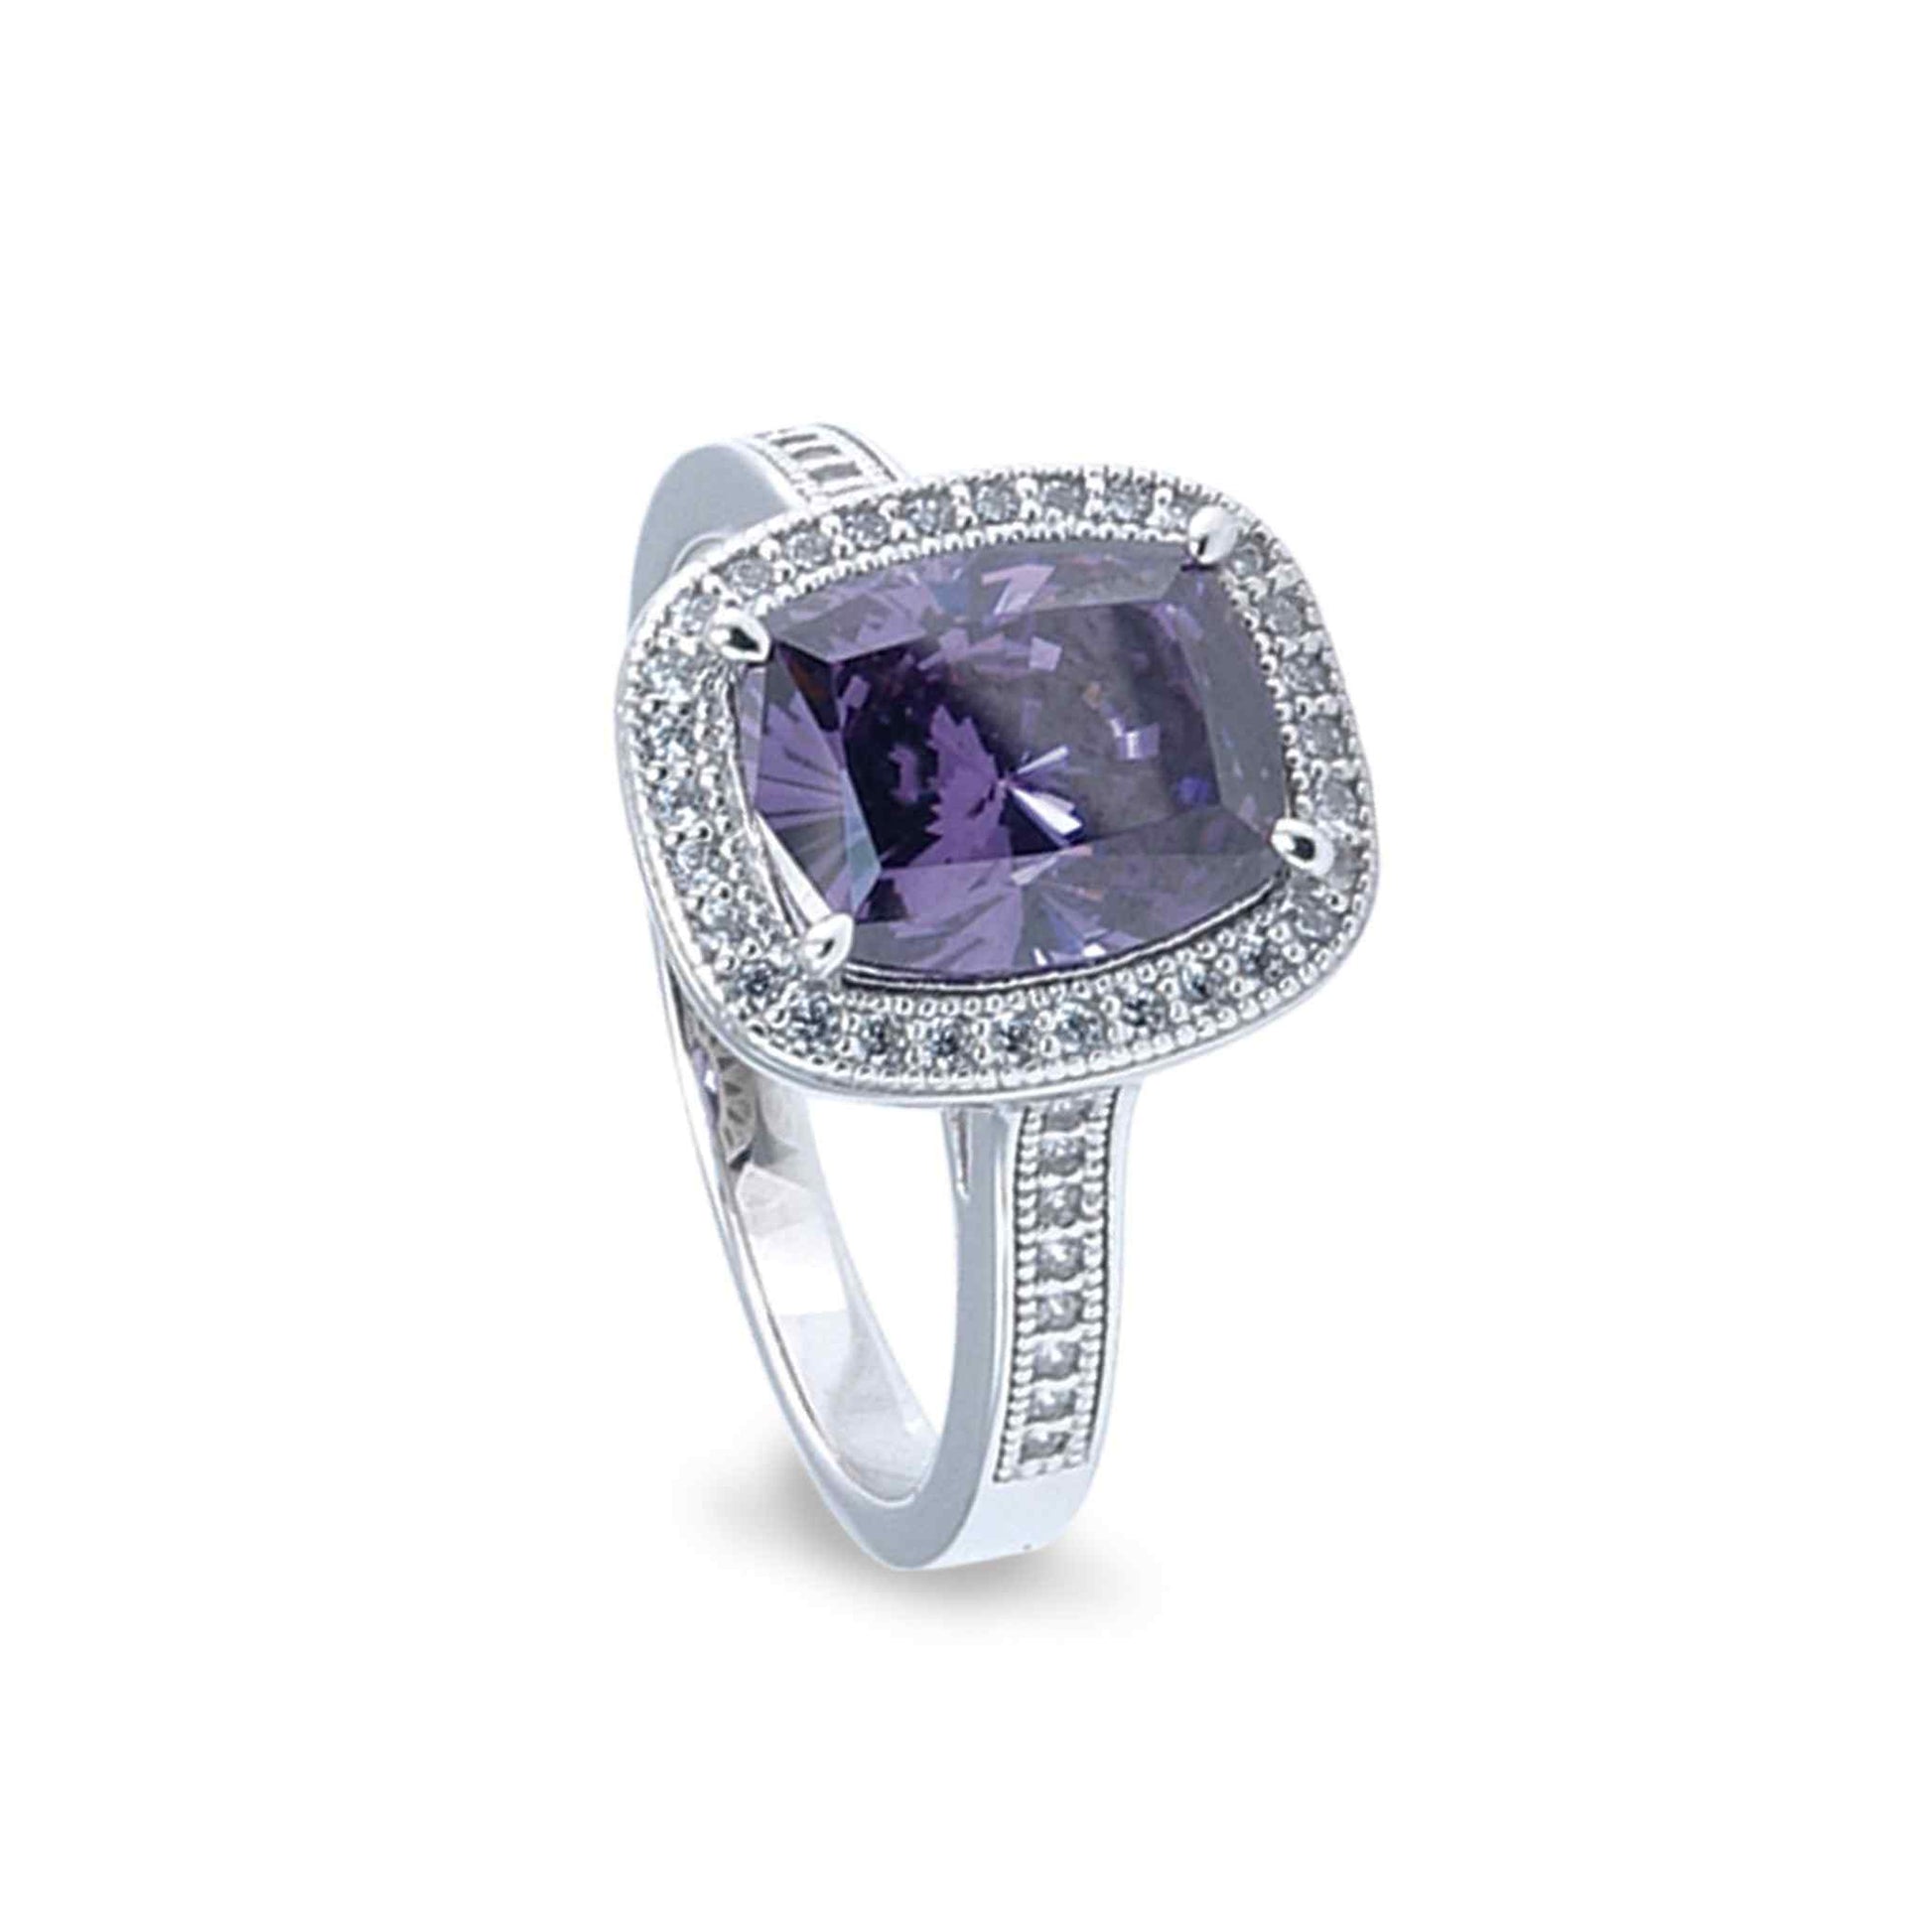 A ring with simulated amethyst and simulated diamonds displayed on a neutral white background.